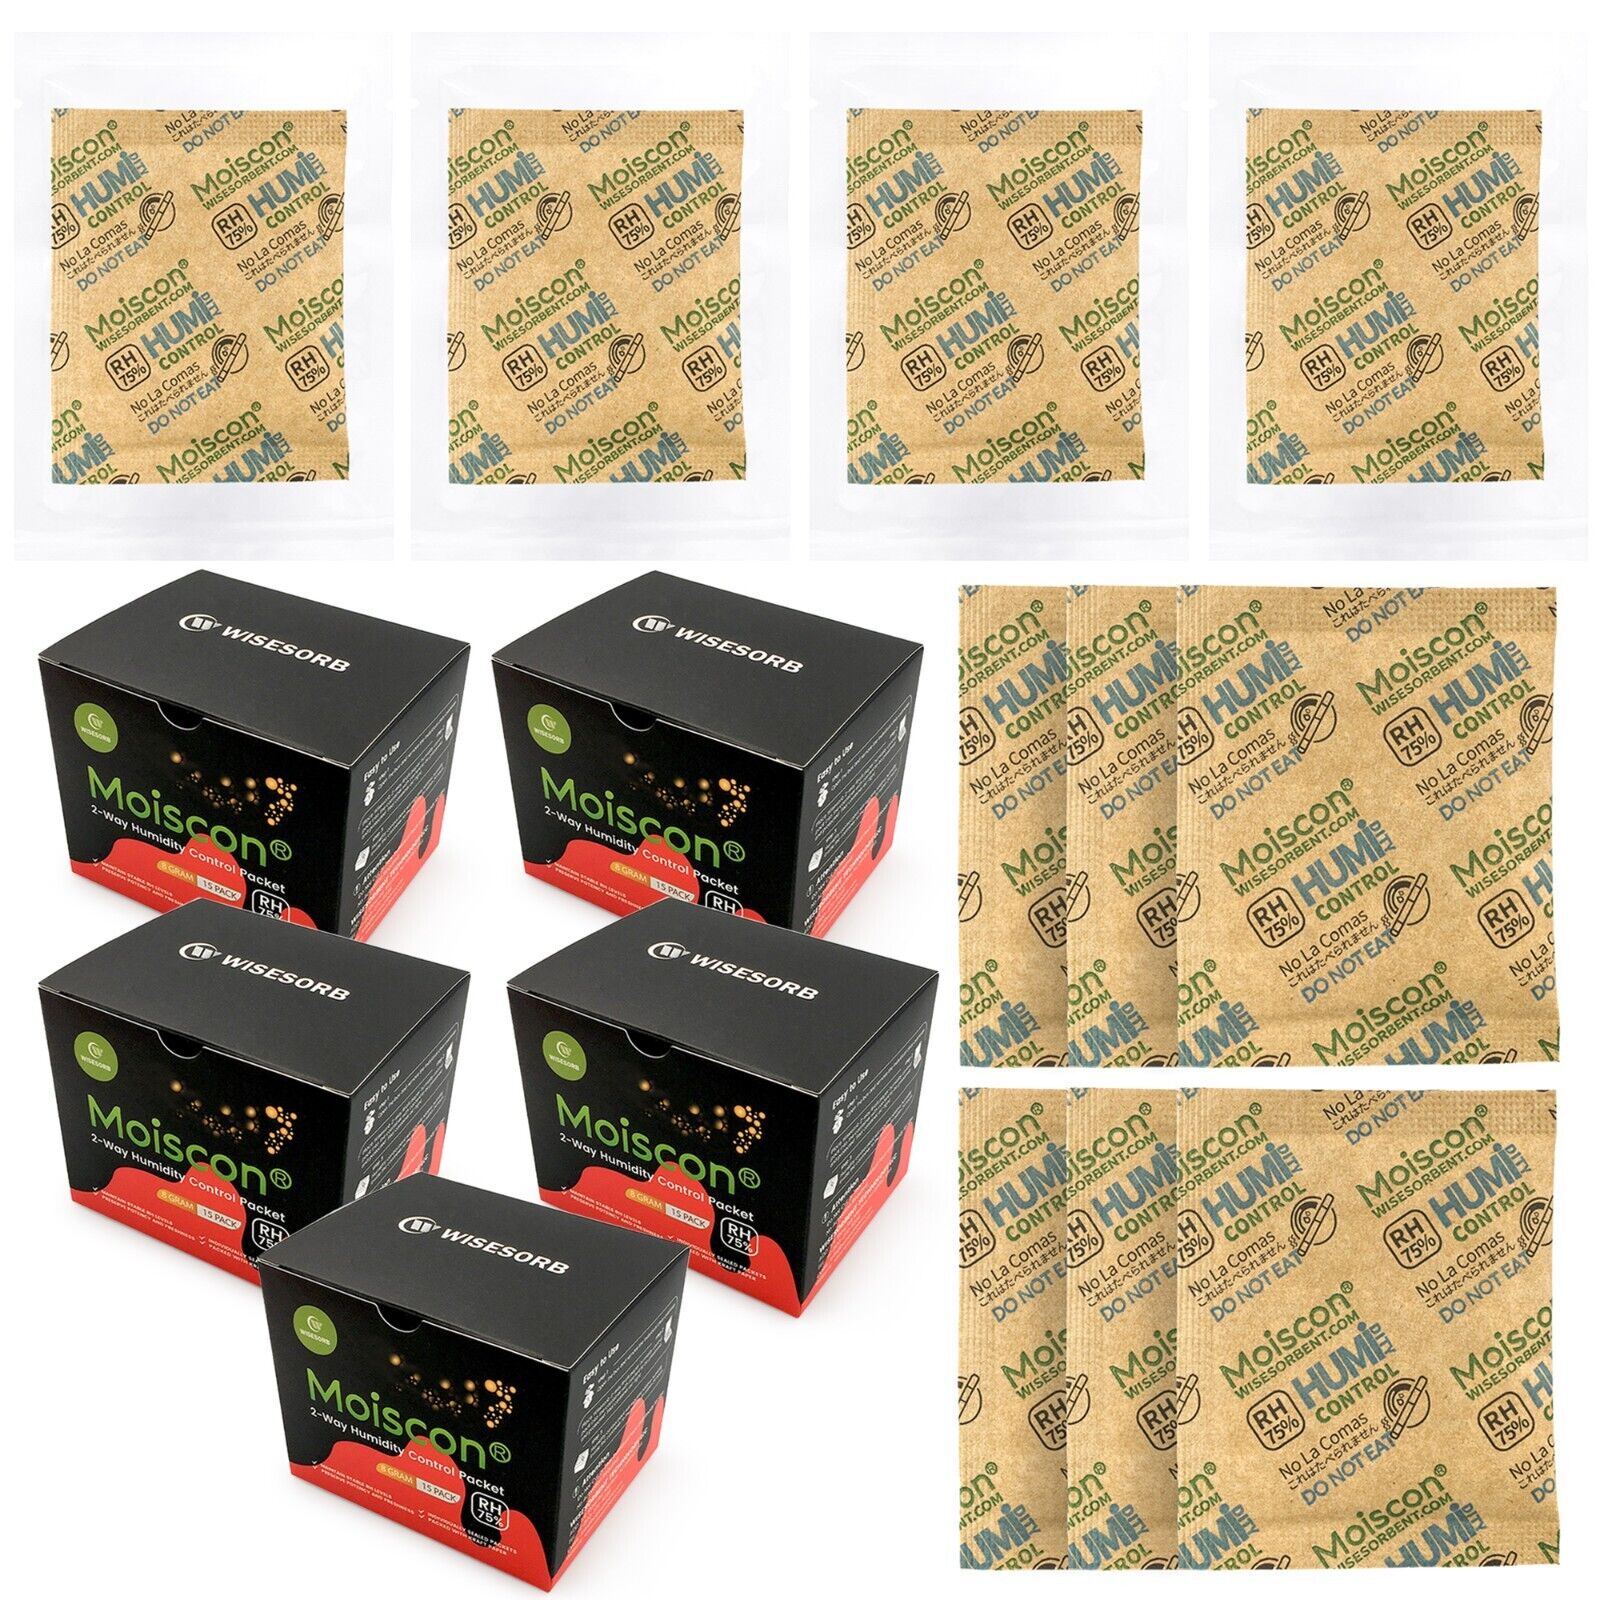 75%RH Two-Way Humidity Control Packs 8 Gram 75 Pack Individually Wrapped